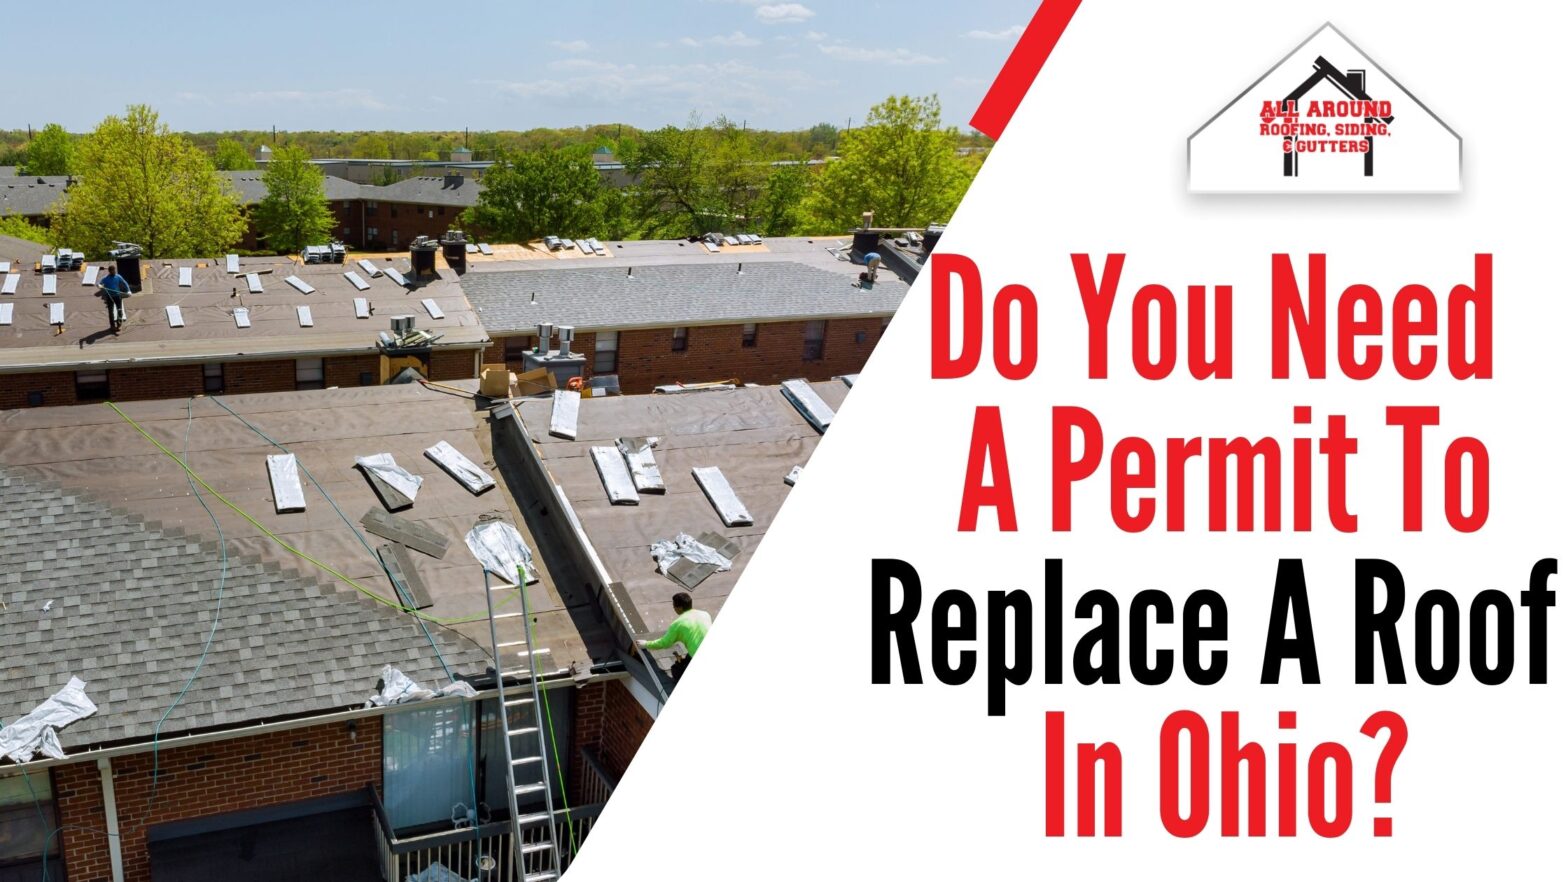 Do You Need A Permit To Replace A Roof In Ohio?